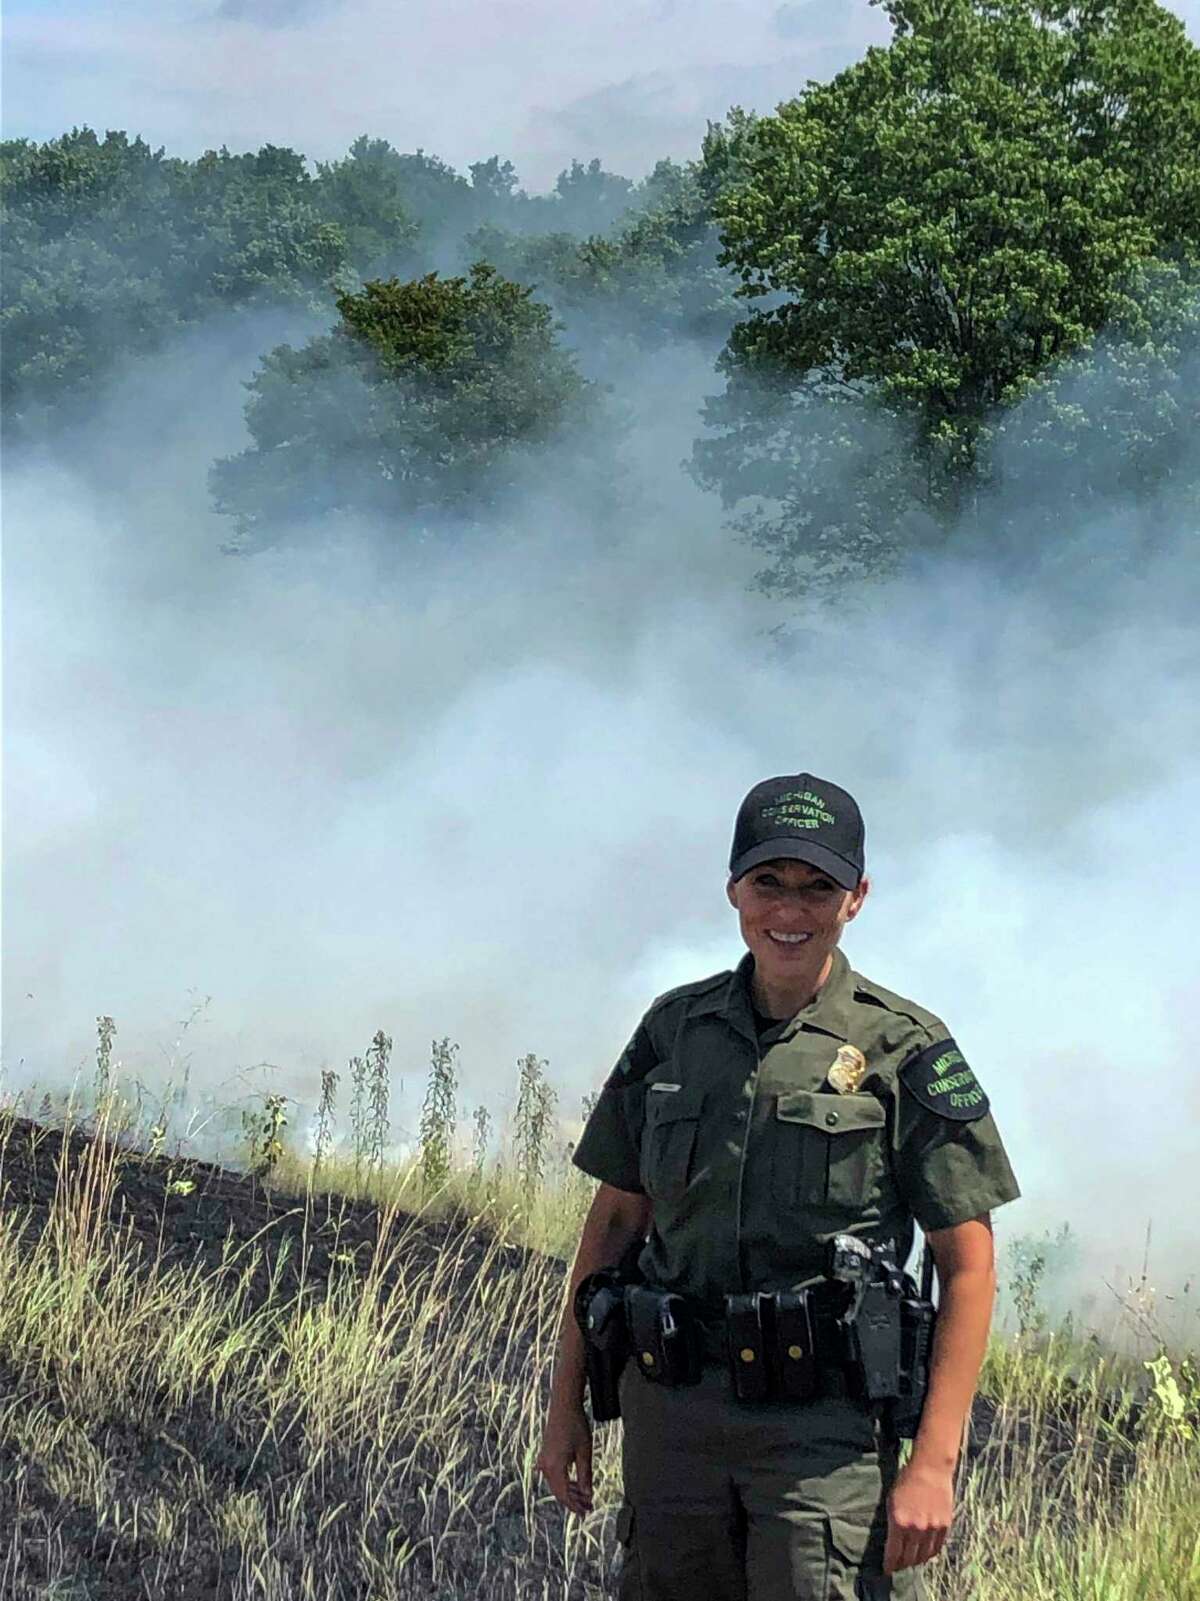 Michigan Conservation Officer Angela Greenway stands in front of smoke from an extinguished wildfire along US-131 that she responded to in 2019. (Courtesy photo/Michigan Department of Natural Resources)